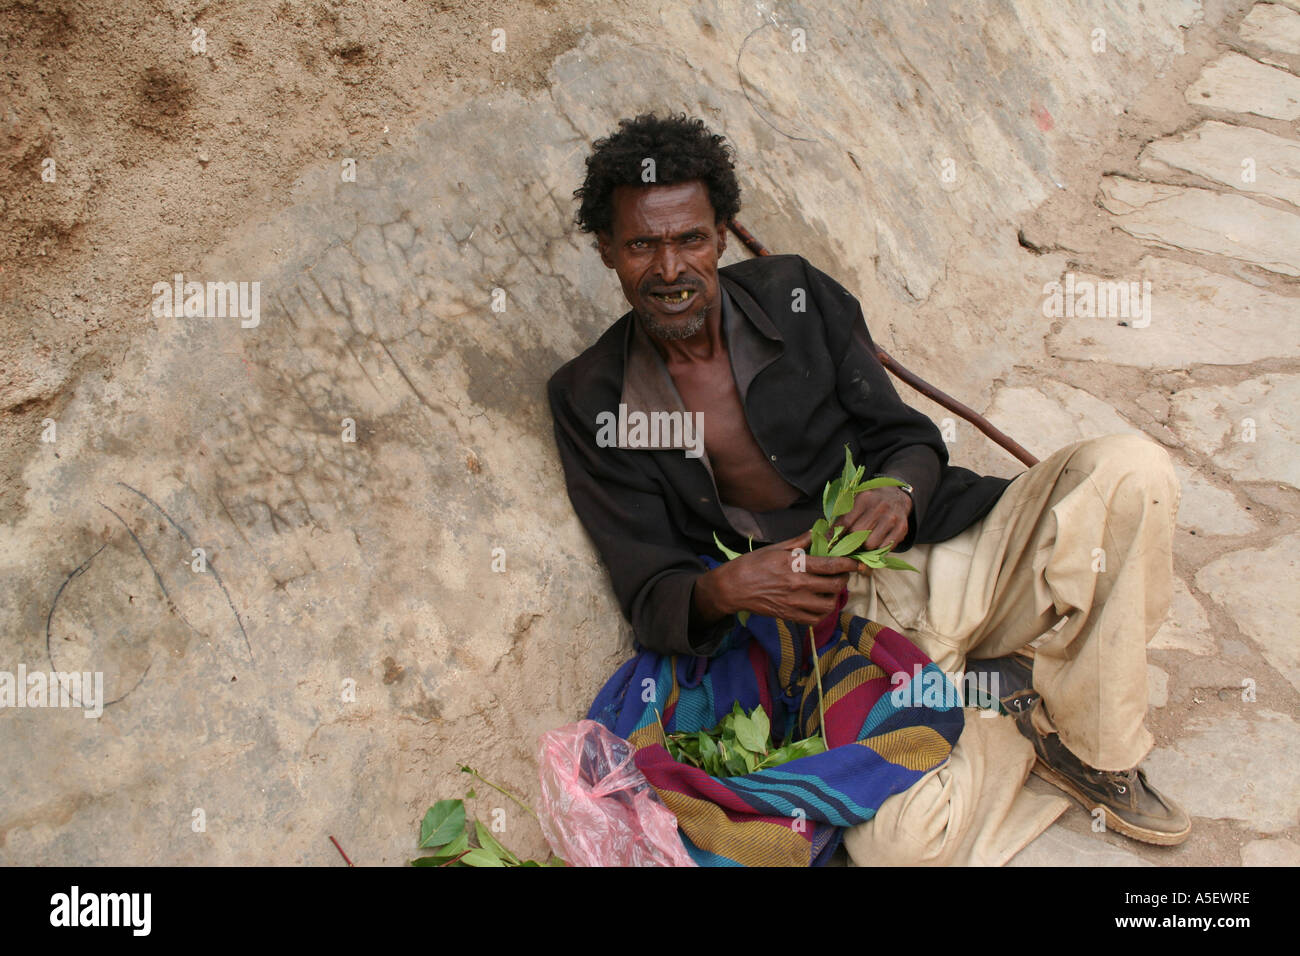 Harar, Ethiopia, homless man chewing Qat leaves on the street Stock Photo